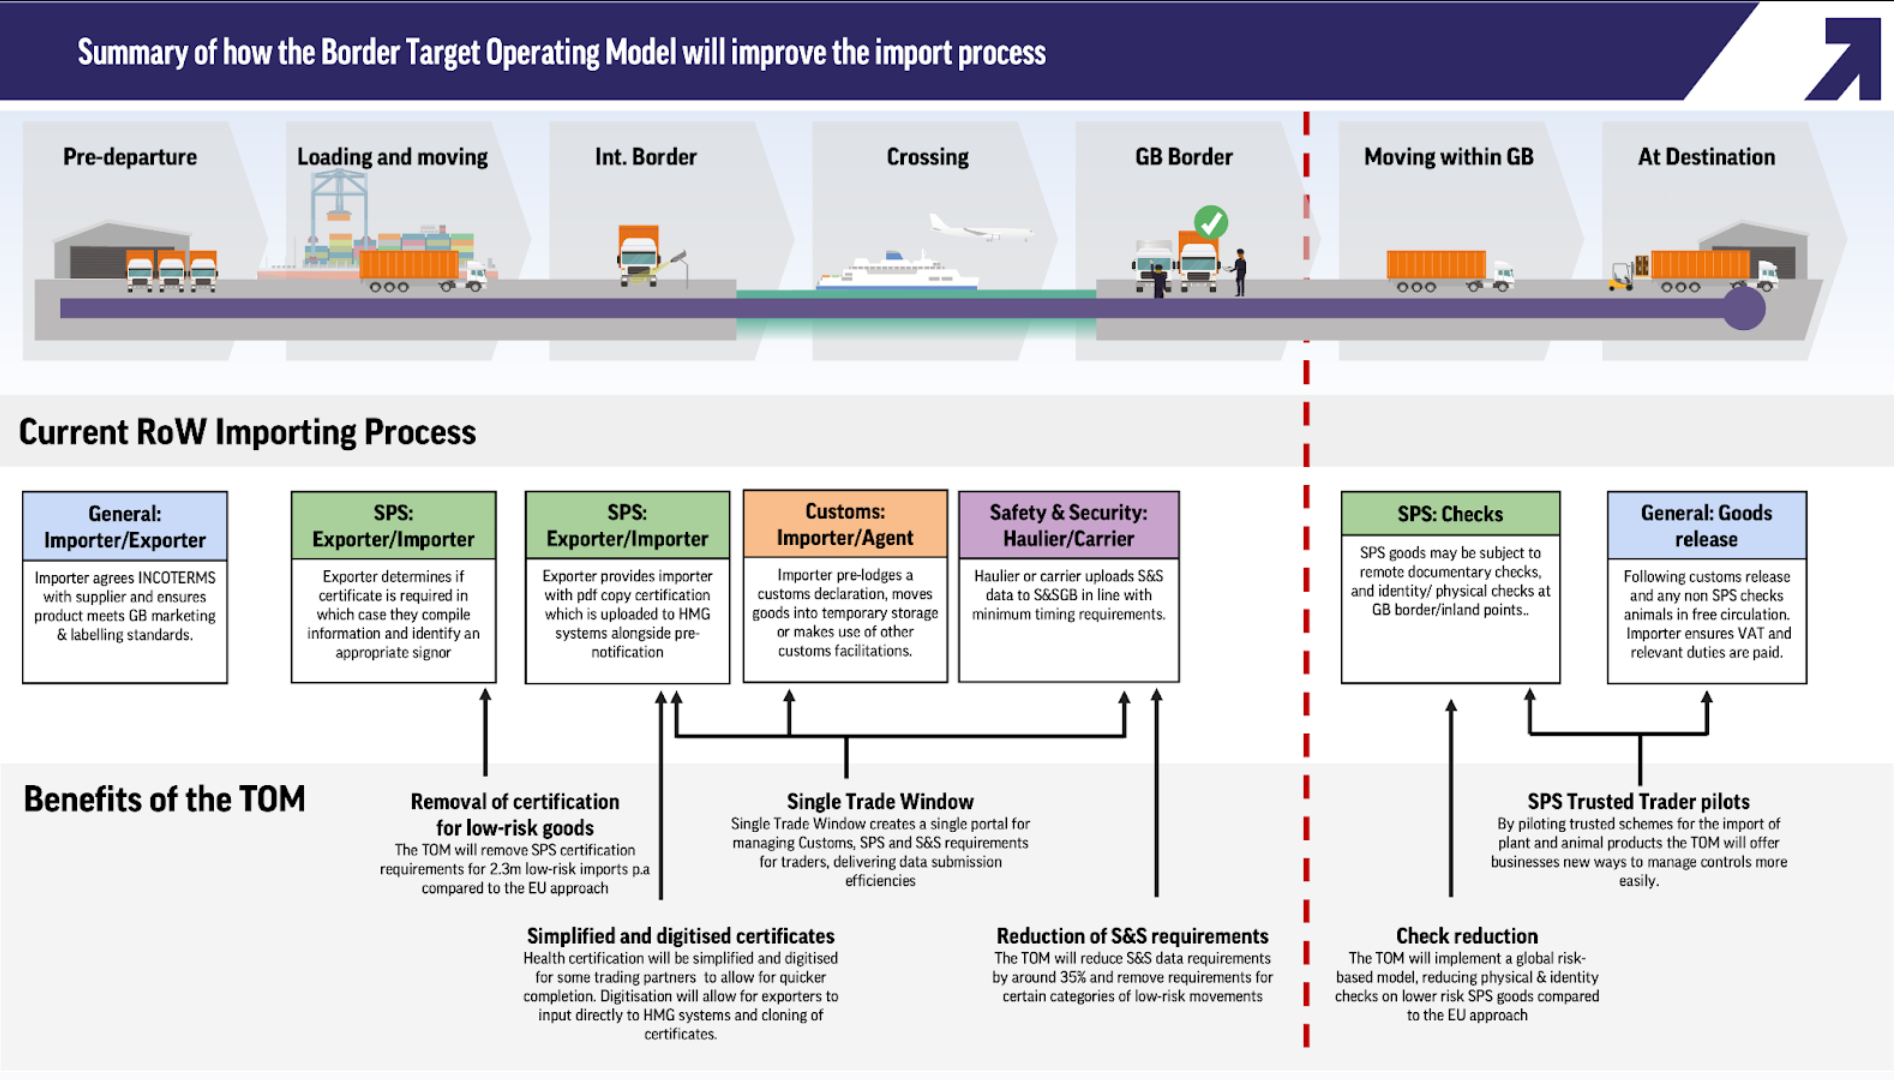 Figure 1 : Summary of how the Border Target Operating Model will improve the import process Source: UK Government TOM website